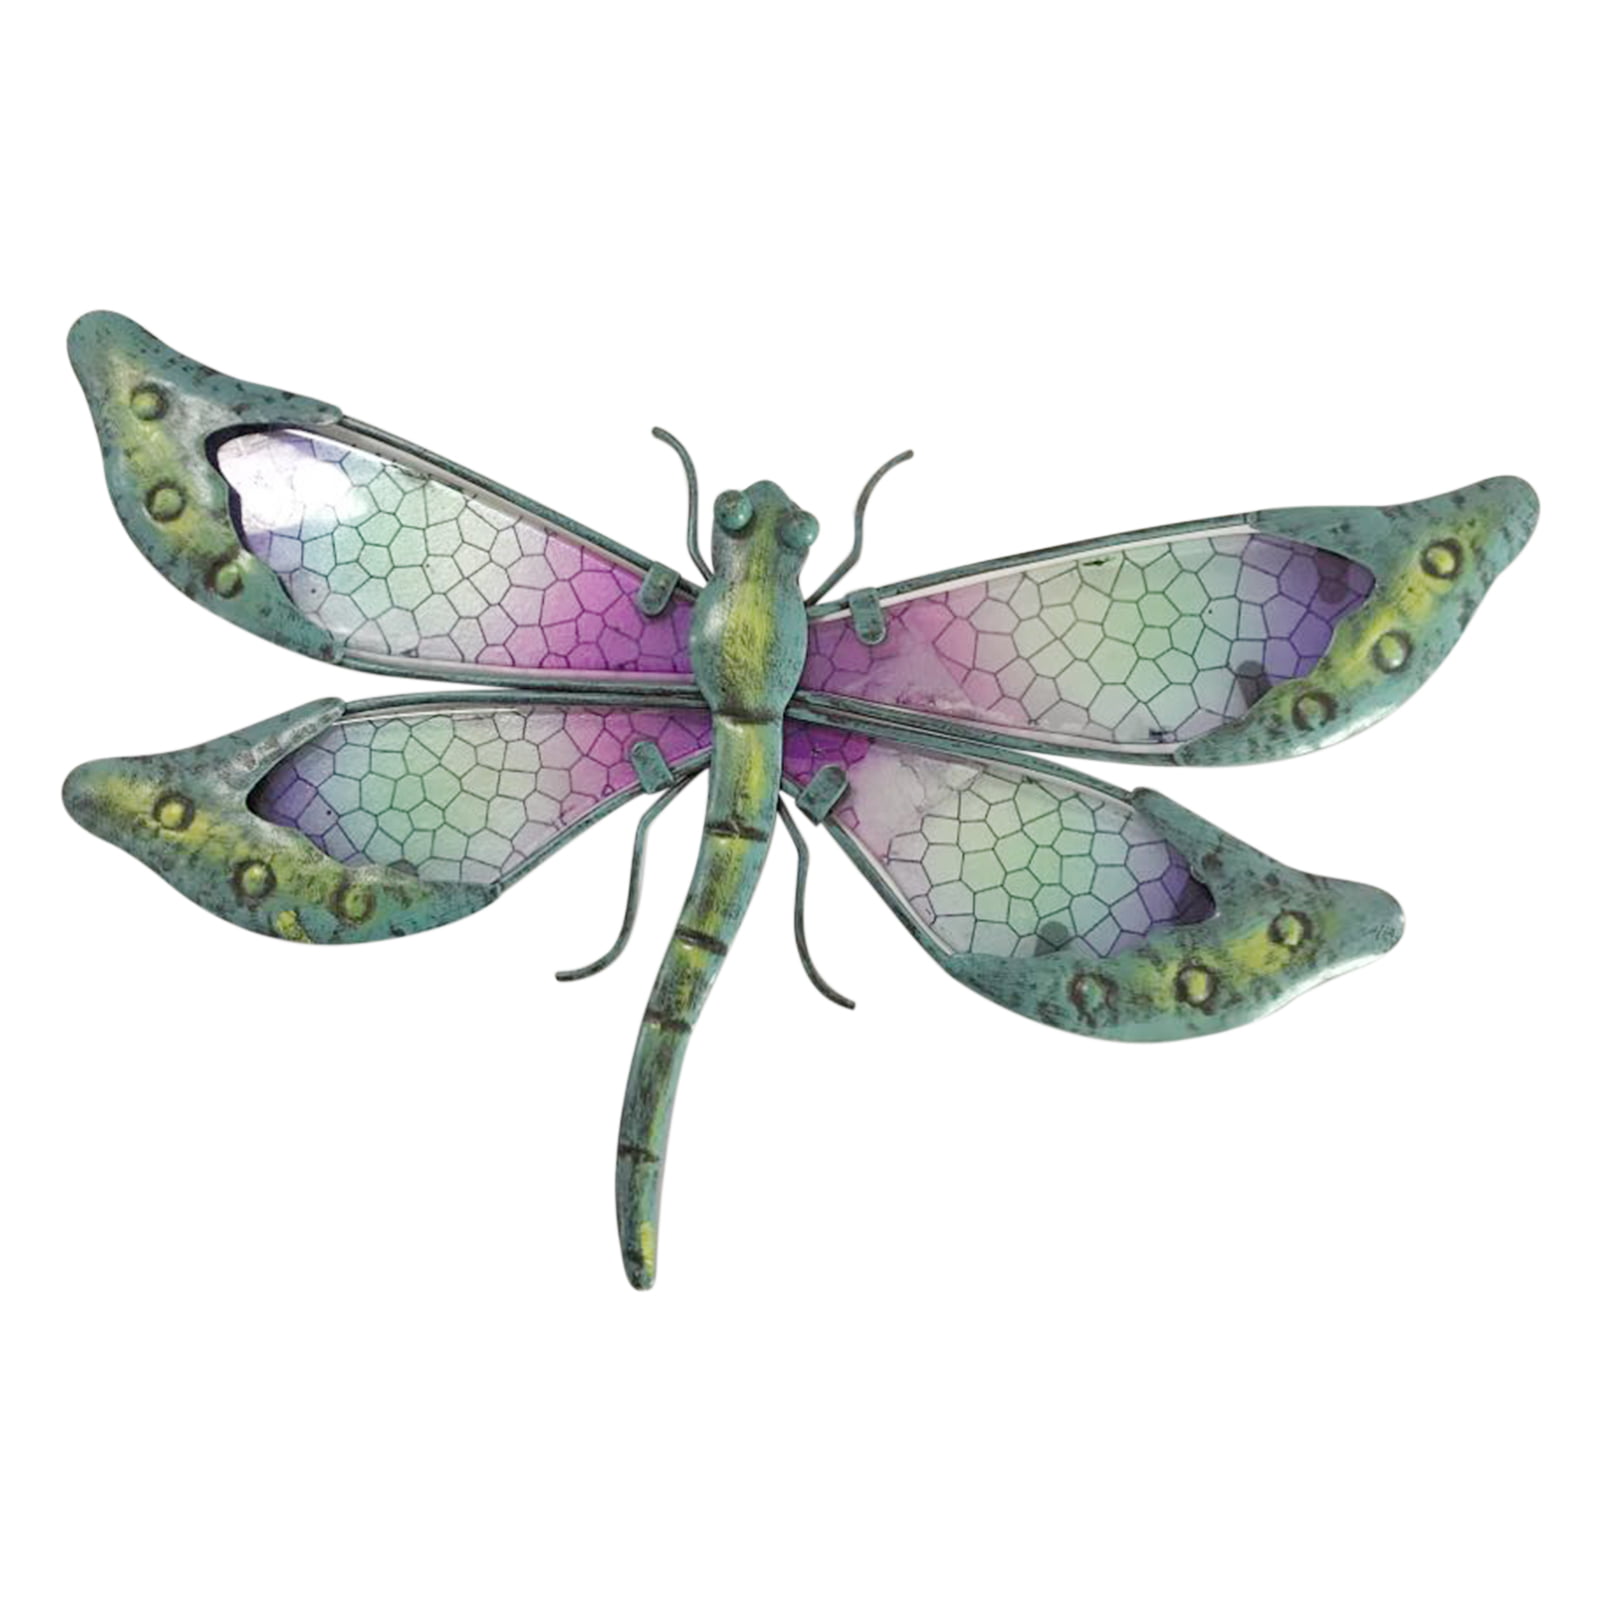 Metal Animal Miniature Dragonfly Wall Artwork For Outdoor Garden Decorations 